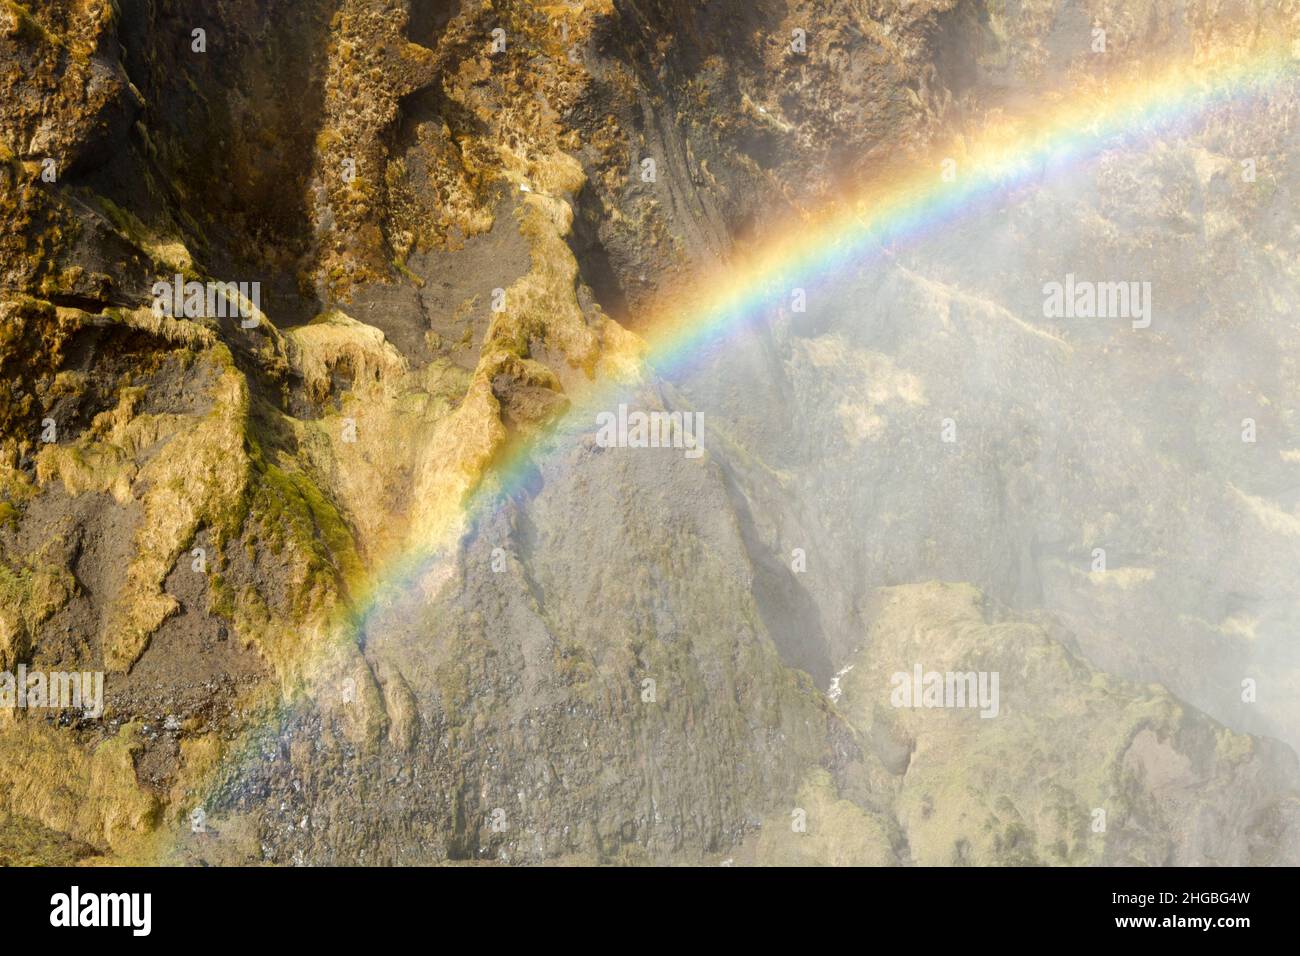 Rainbow created in the water spray at Skogafoss waterfall in Iceland Stock Photo